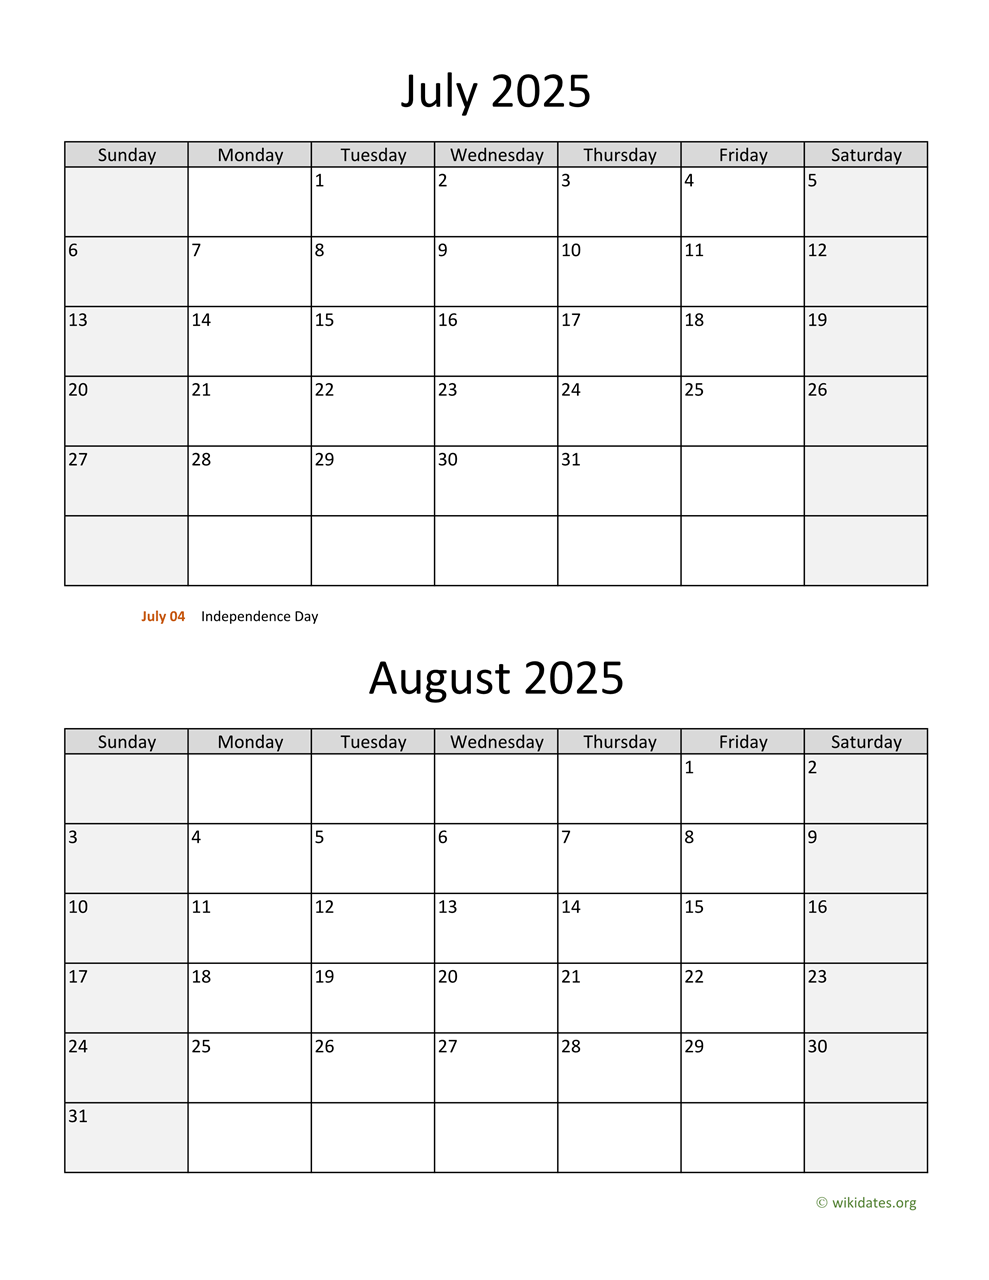 july-and-august-2025-calendar-wikidates